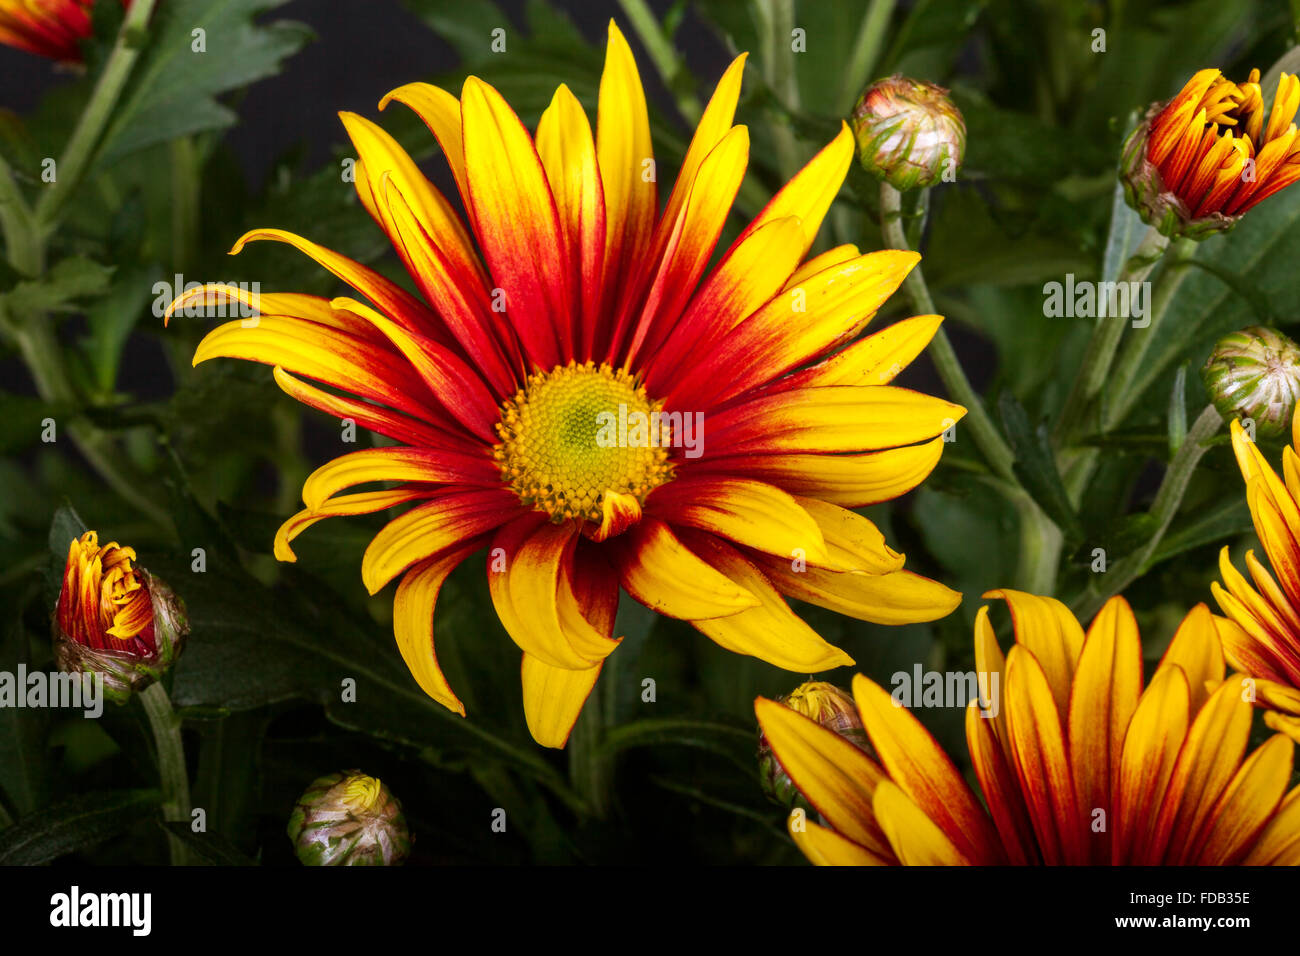 Gazania is a genus of flowering plants in the family Asteraceae, native to Southern Africa.  They produce large, daisy-like comp Stock Photo